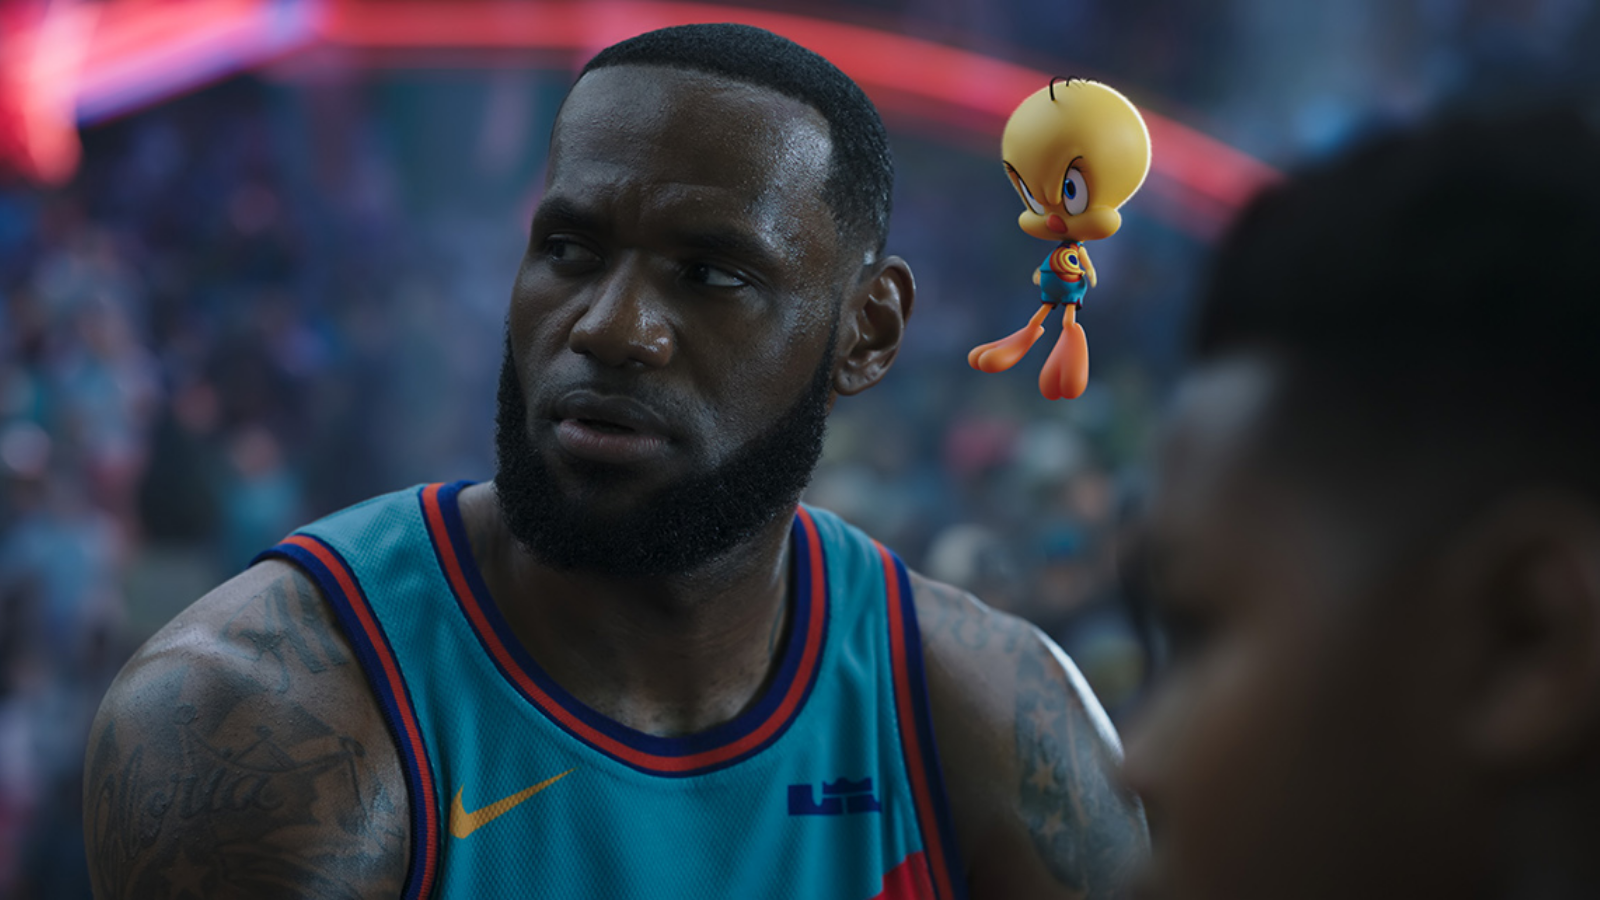 The 'Space Jam' sequel starring LeBron James is now streaming—here's how to watch it